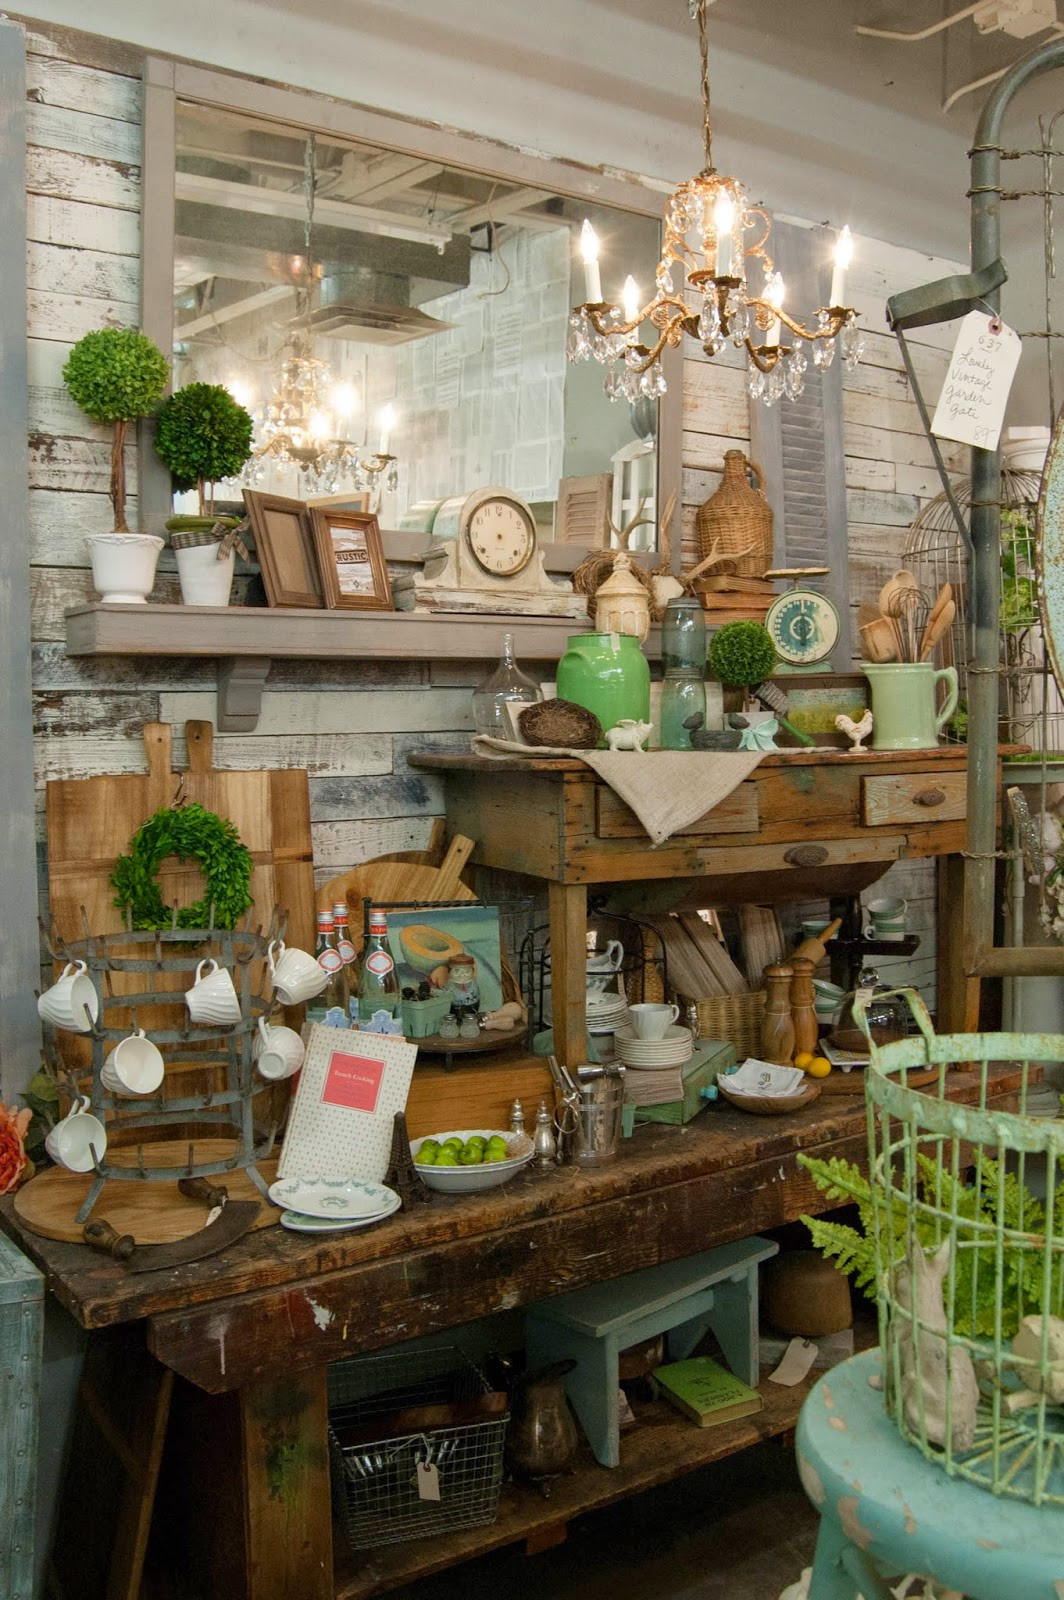 Spring Ideas For Resale Booths
 display ideas on Pinterest